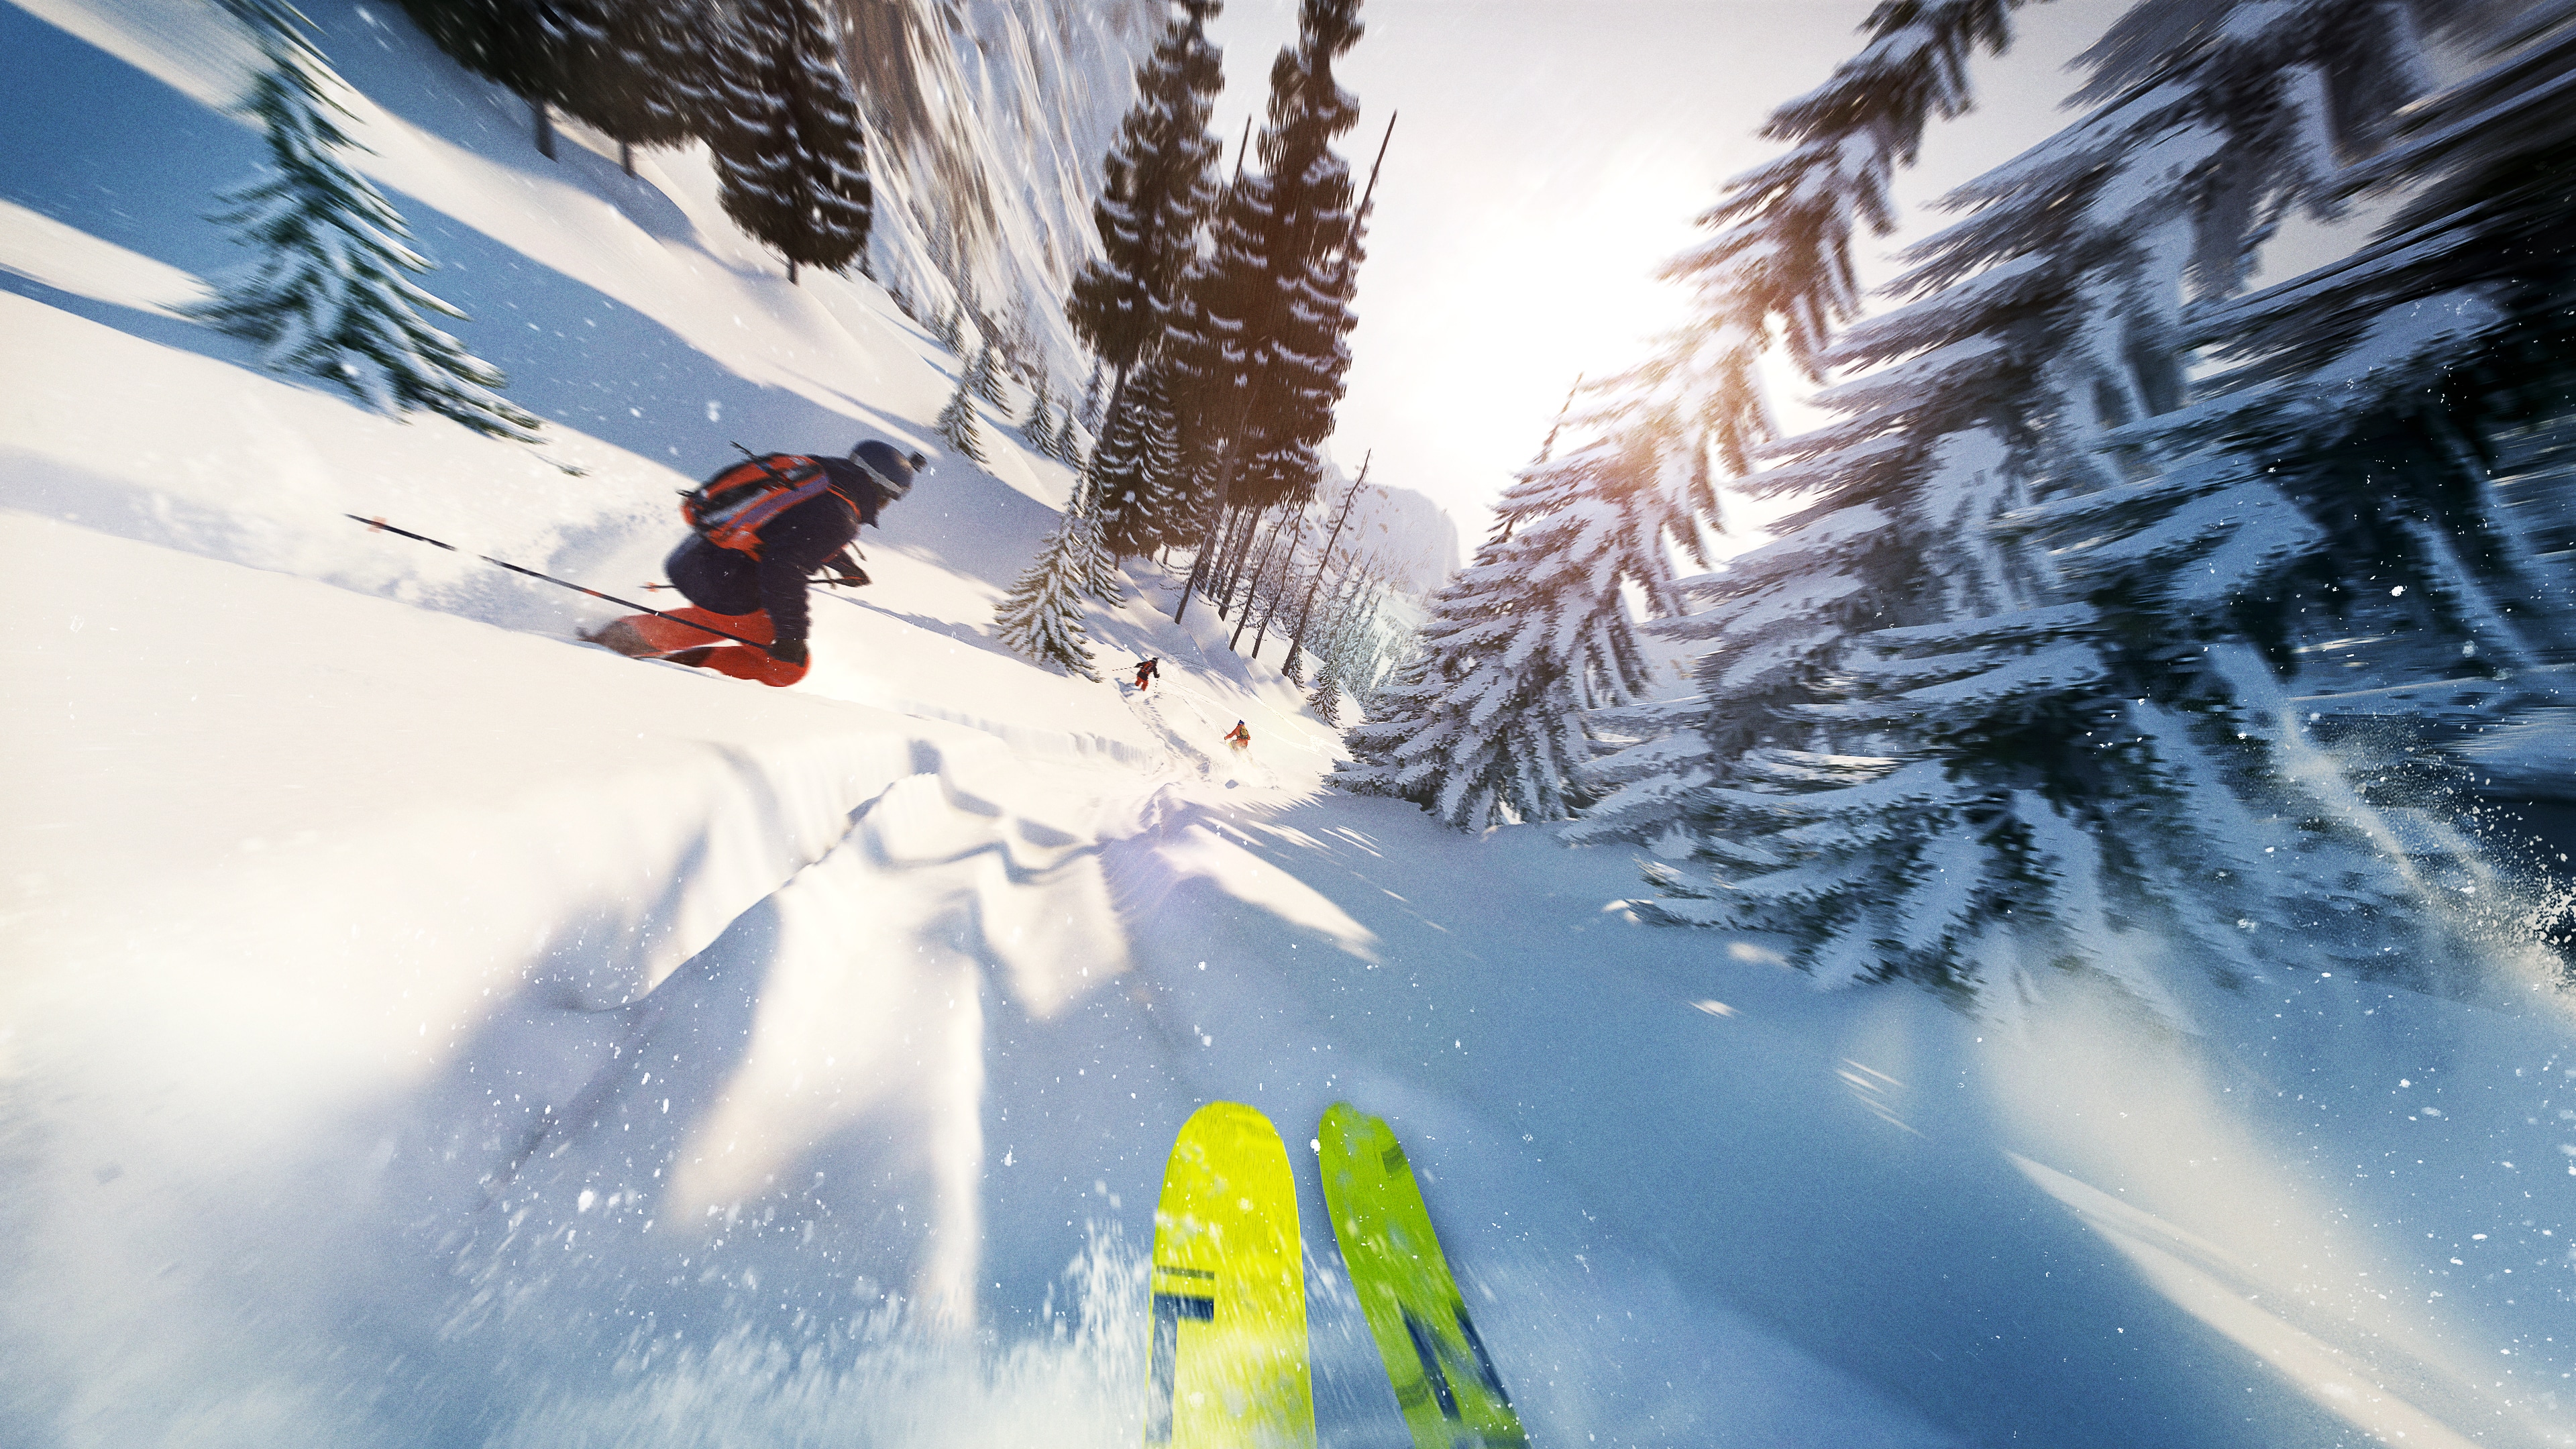 firstperson_forest_4skiers